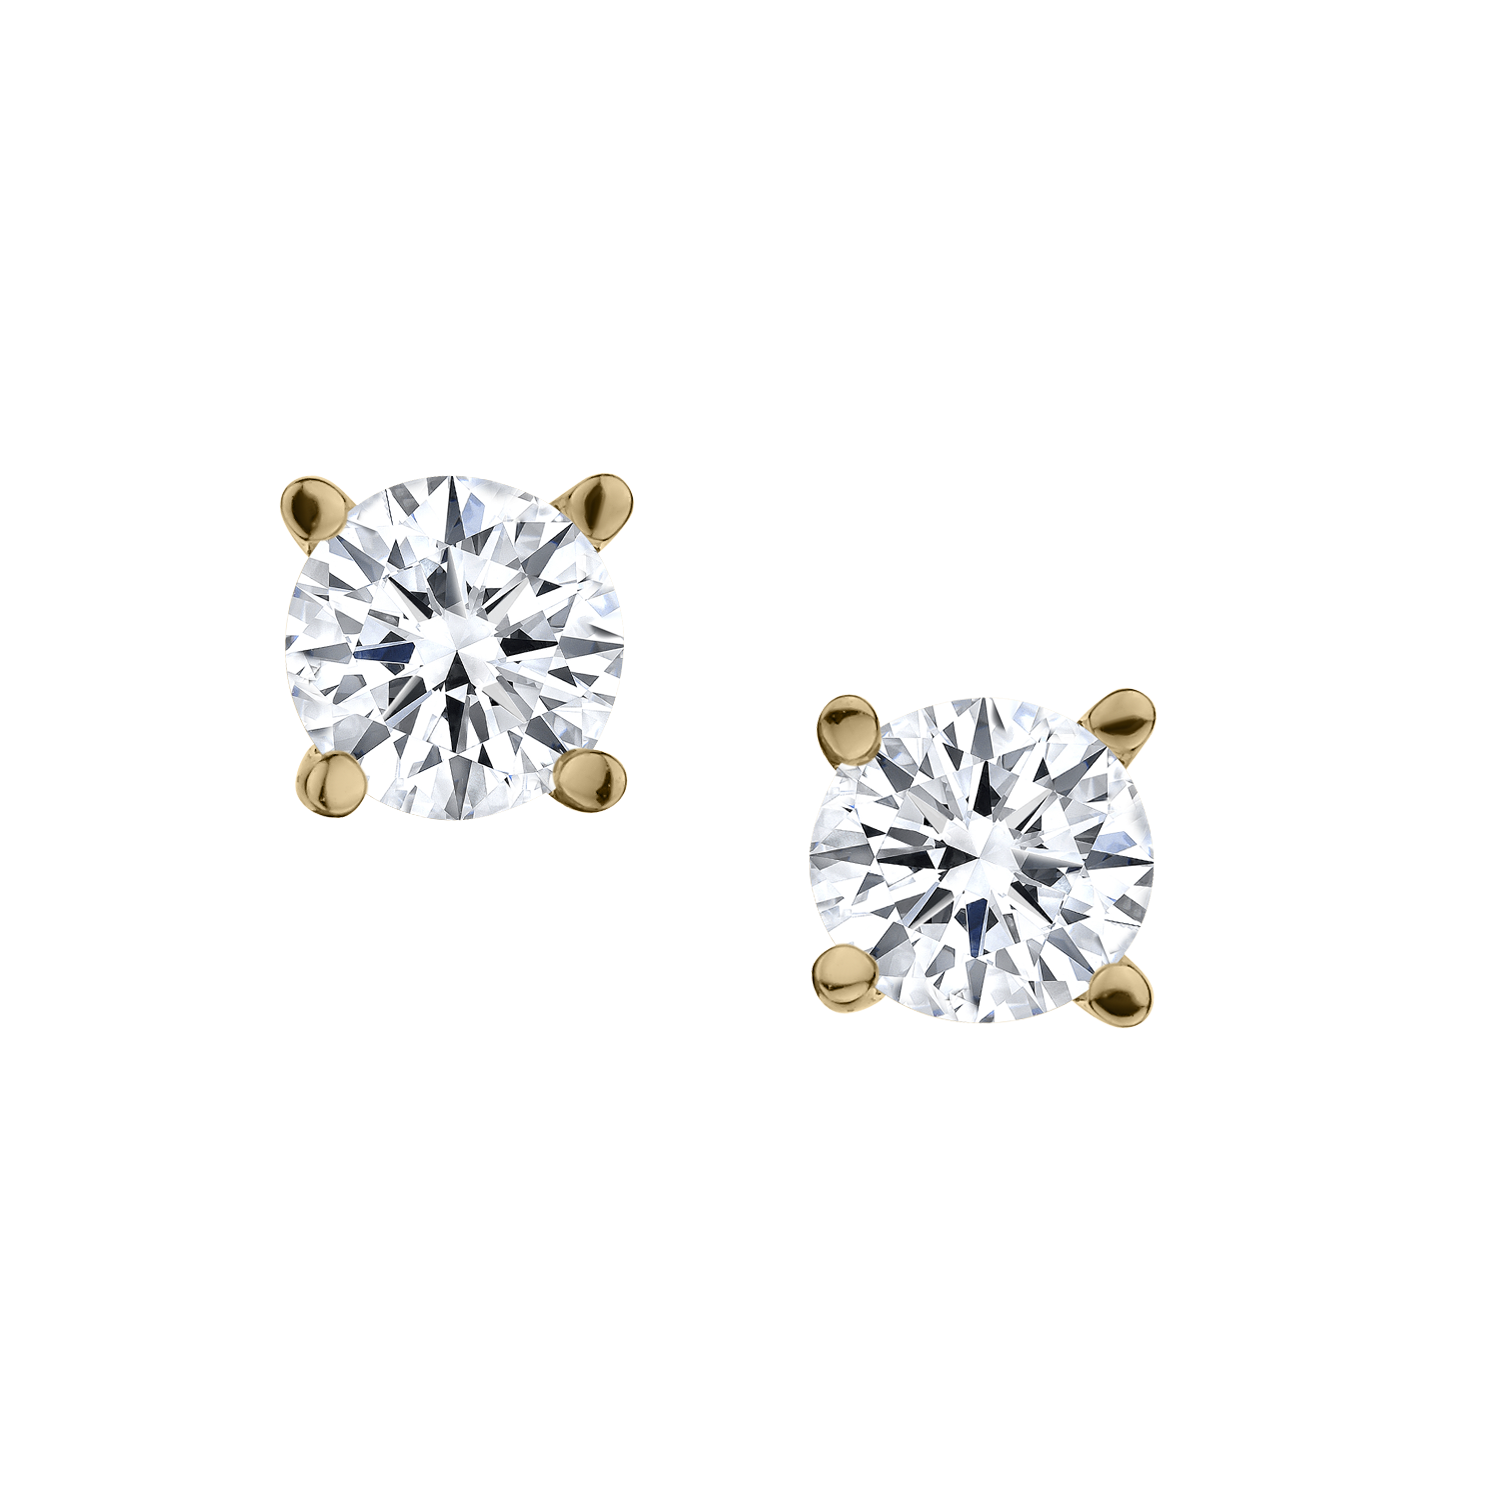 150Ct solitaire earrings in yellow gold with round diamonds  BAUNAT